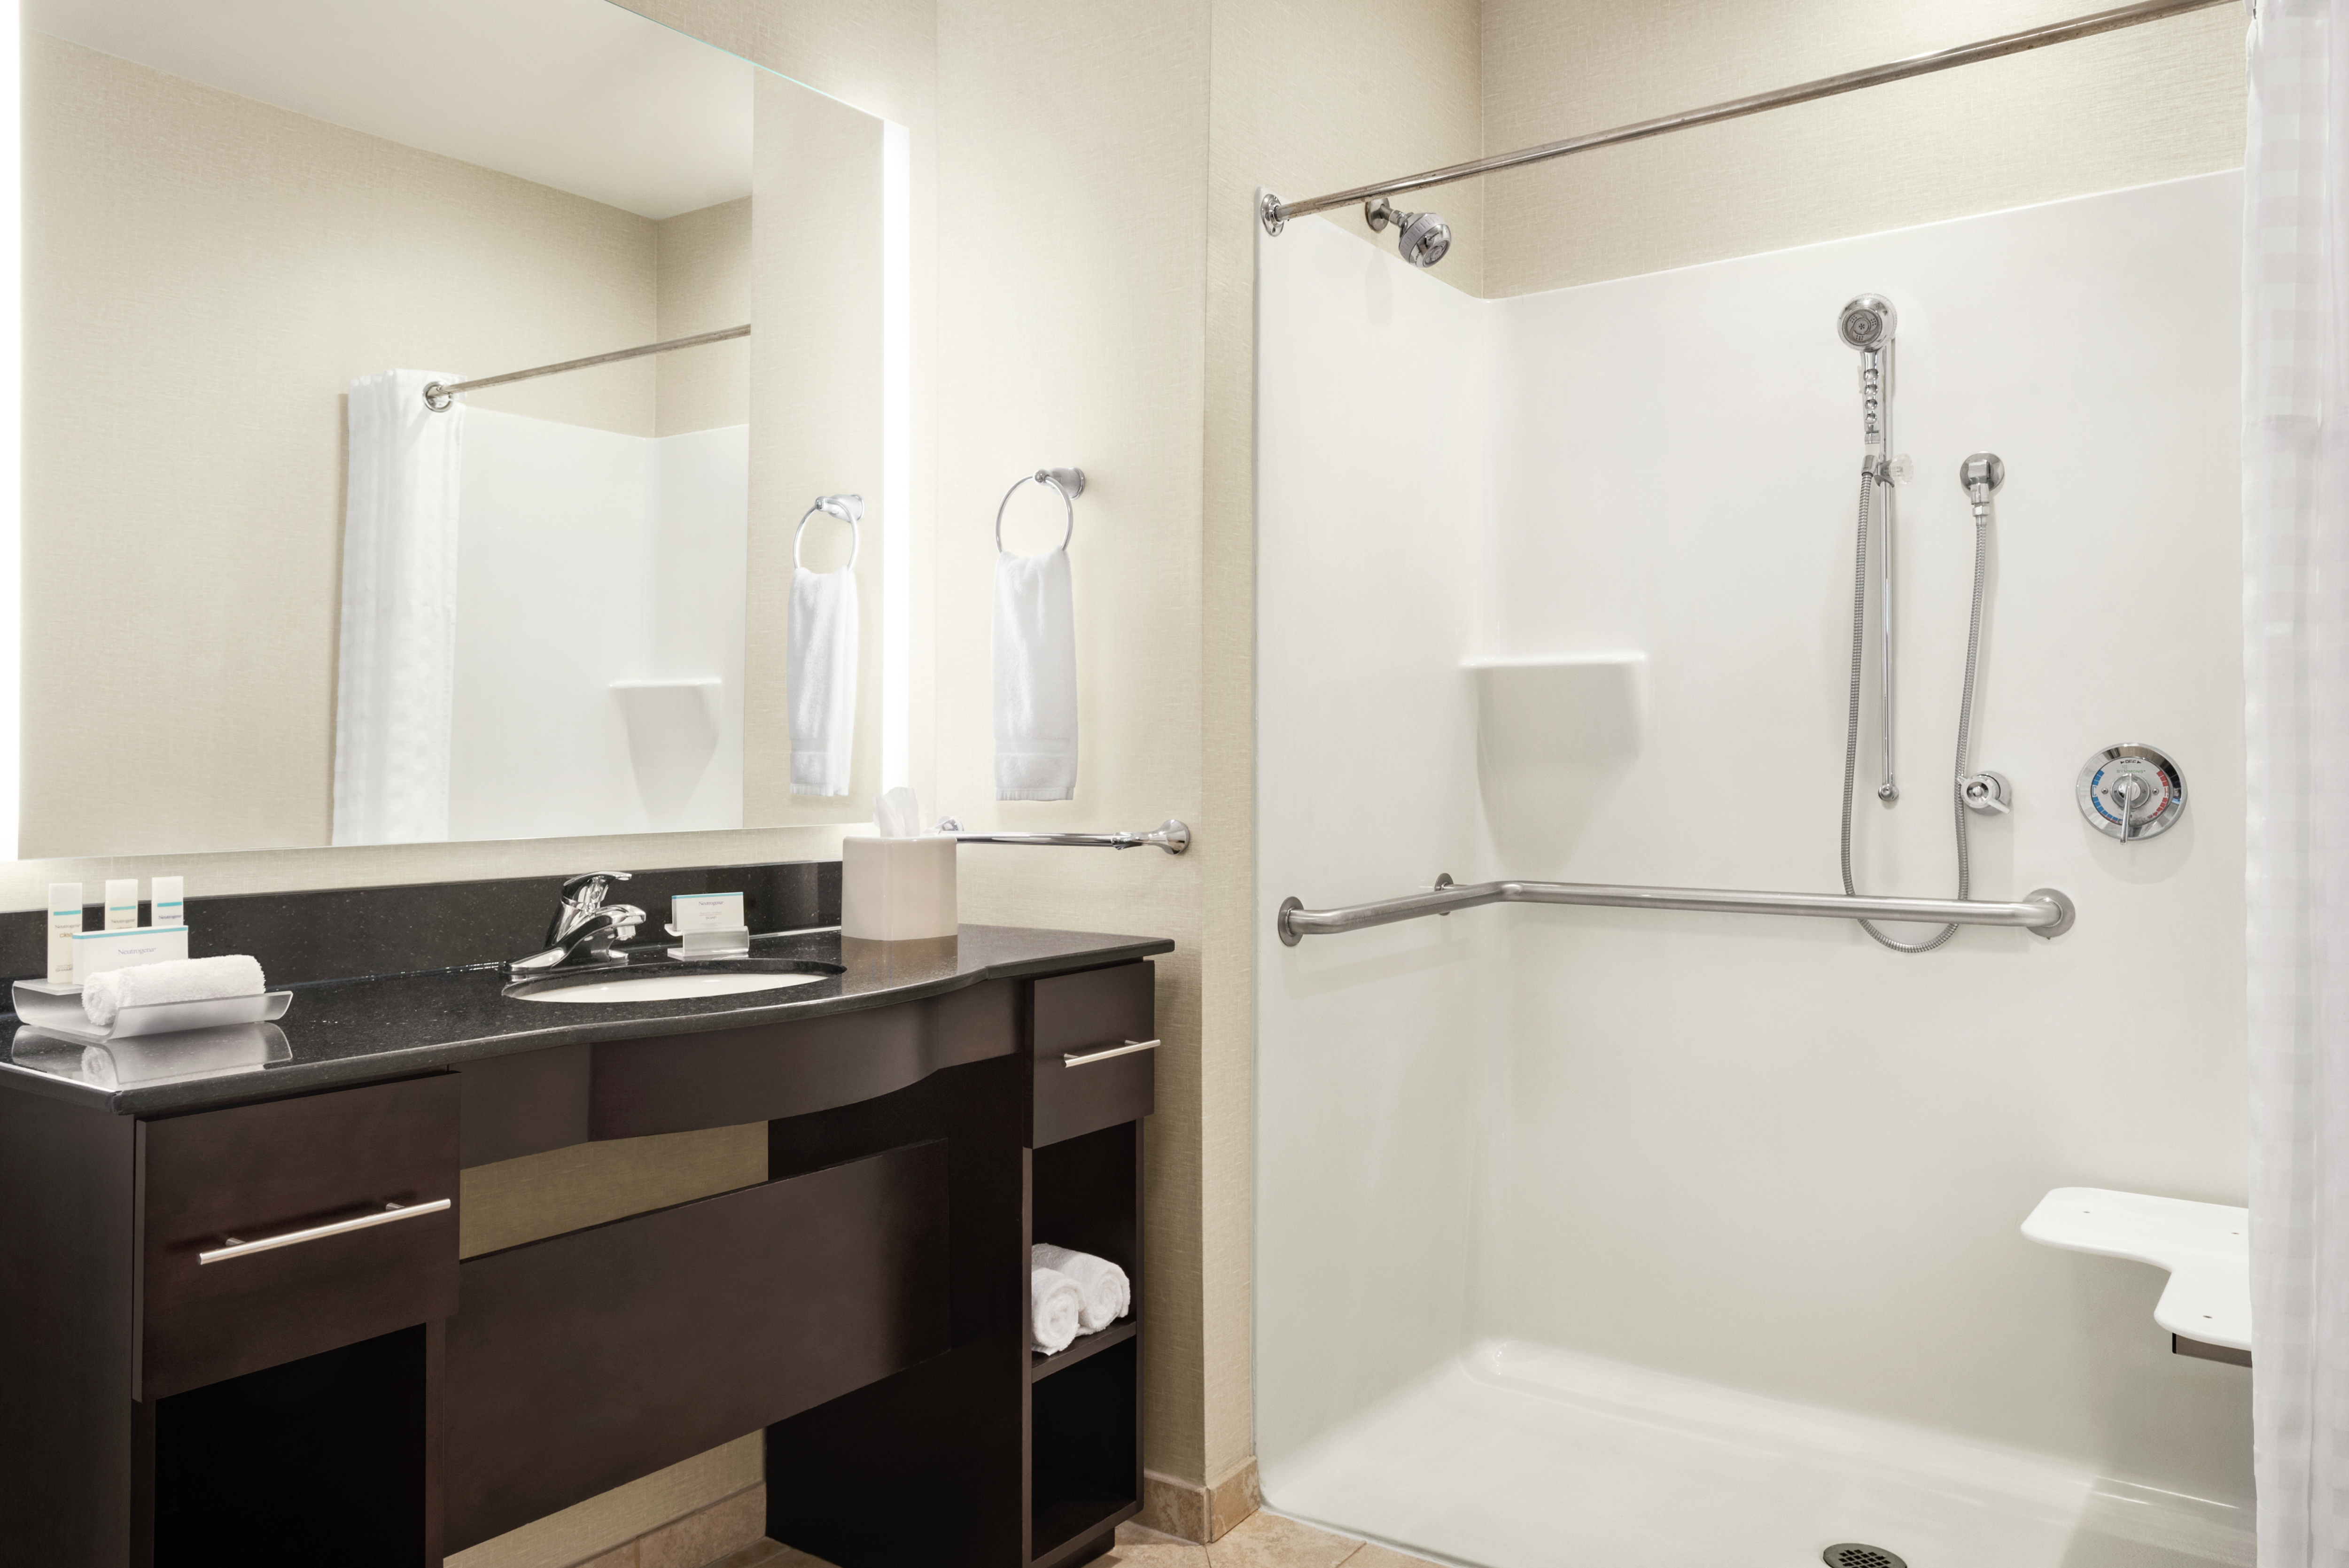 Spacious accessible bathroom with easy roll-in shower, in shower seat, vanity and large mirror.